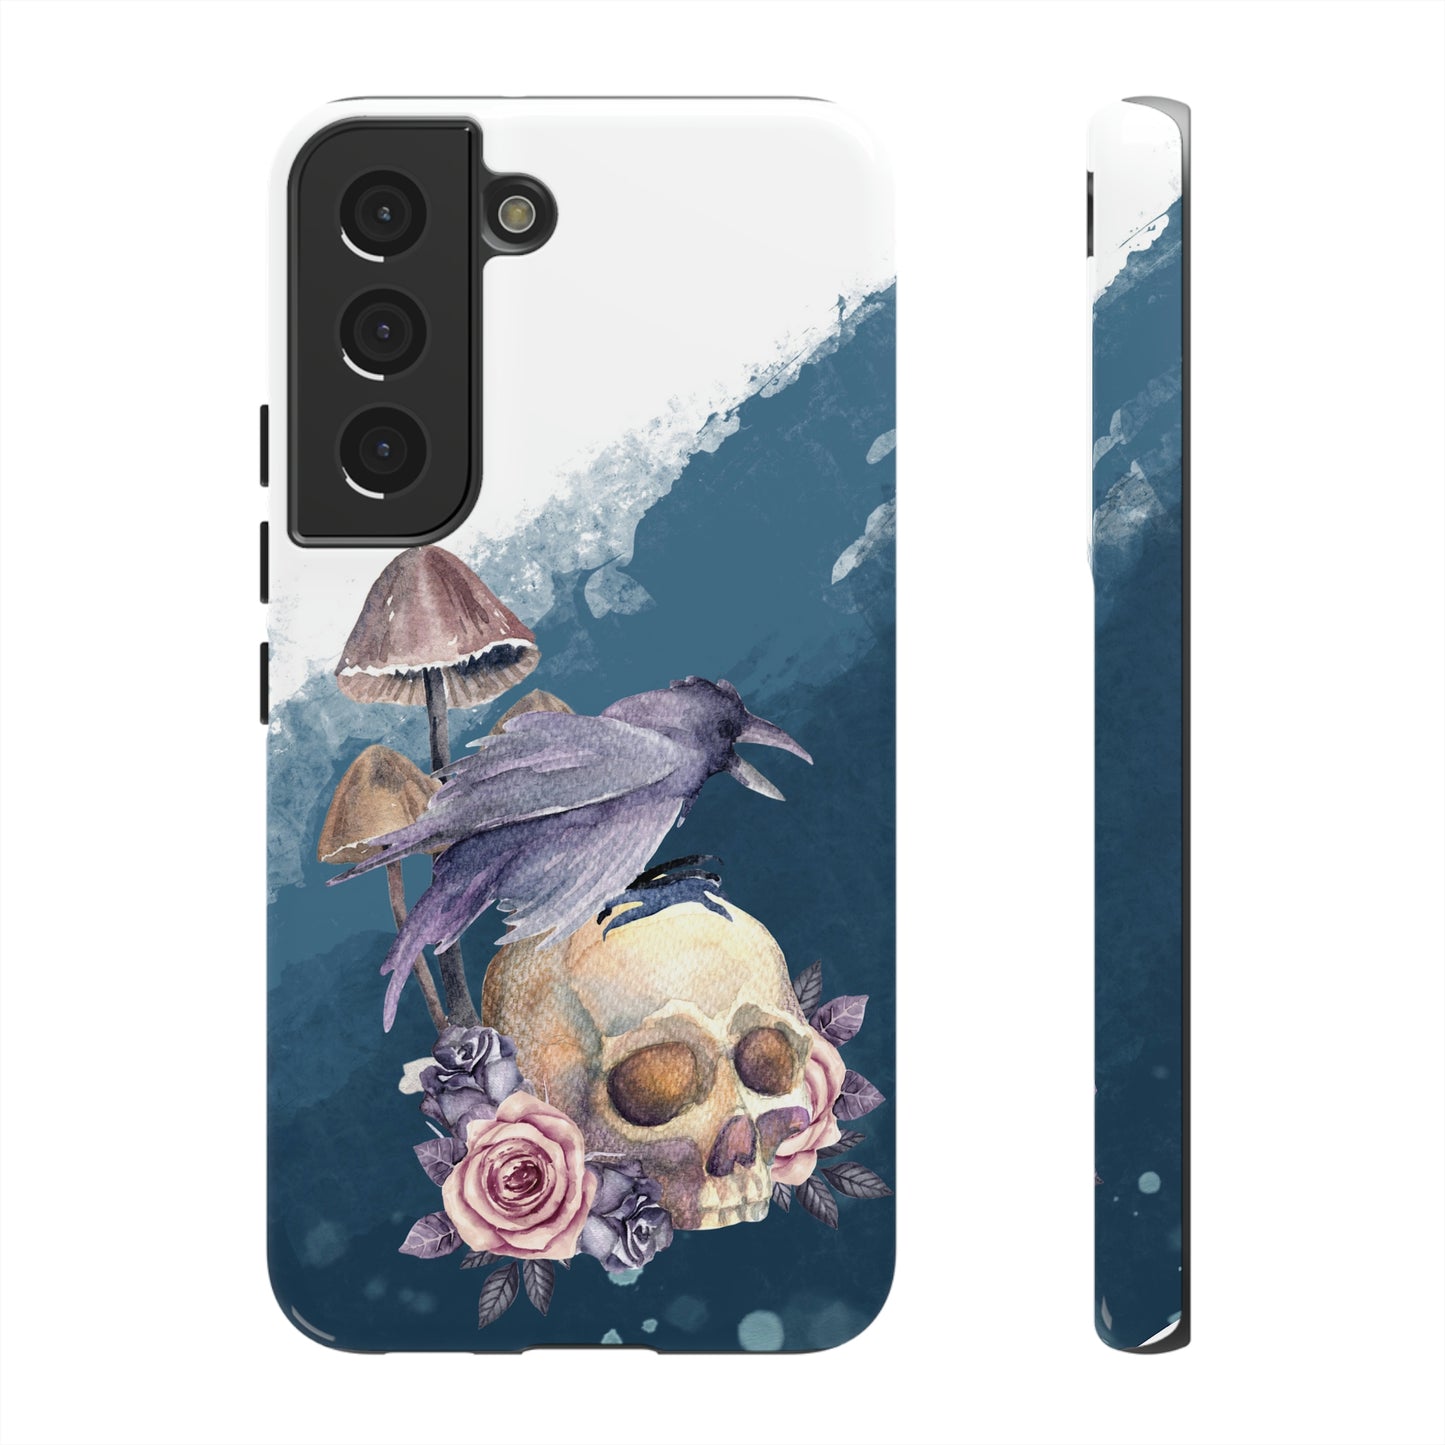 Watercolor Raven and Skull - Phone Case